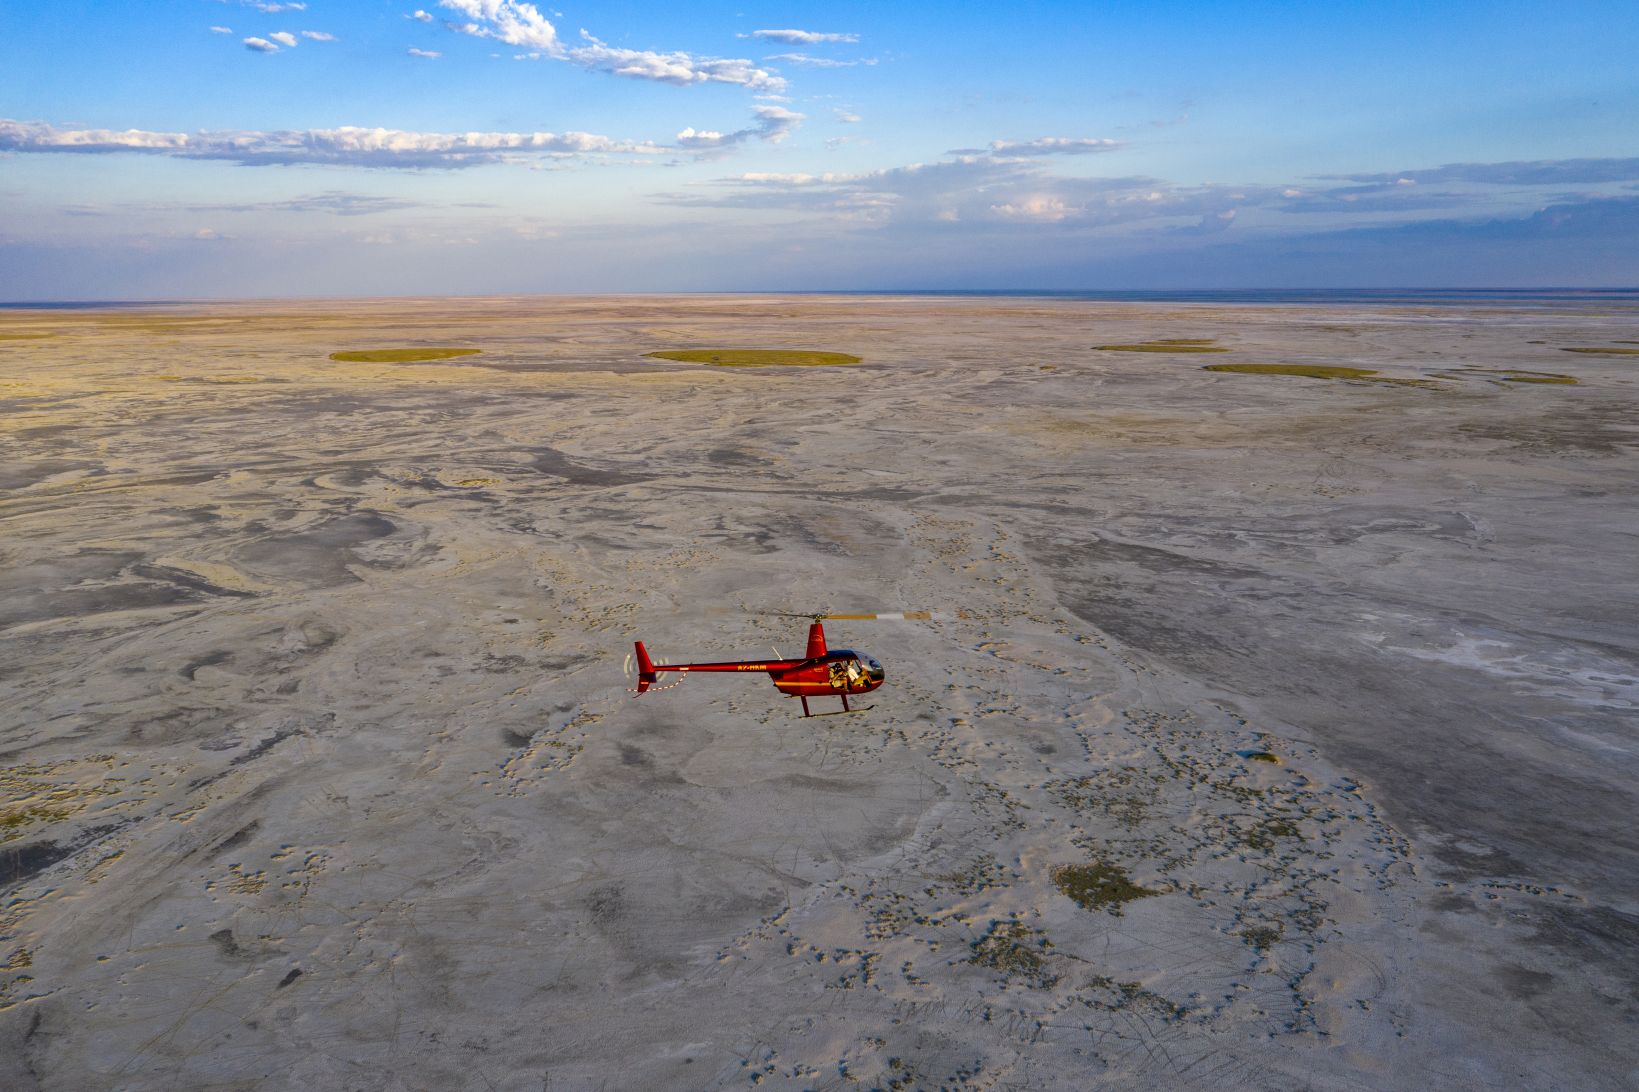 Desert & Delta Safaris now offers intrepid travelers the chance to spend the night out under the stars in Botswana's acclaimed Makgadikgadi Salt Pan.